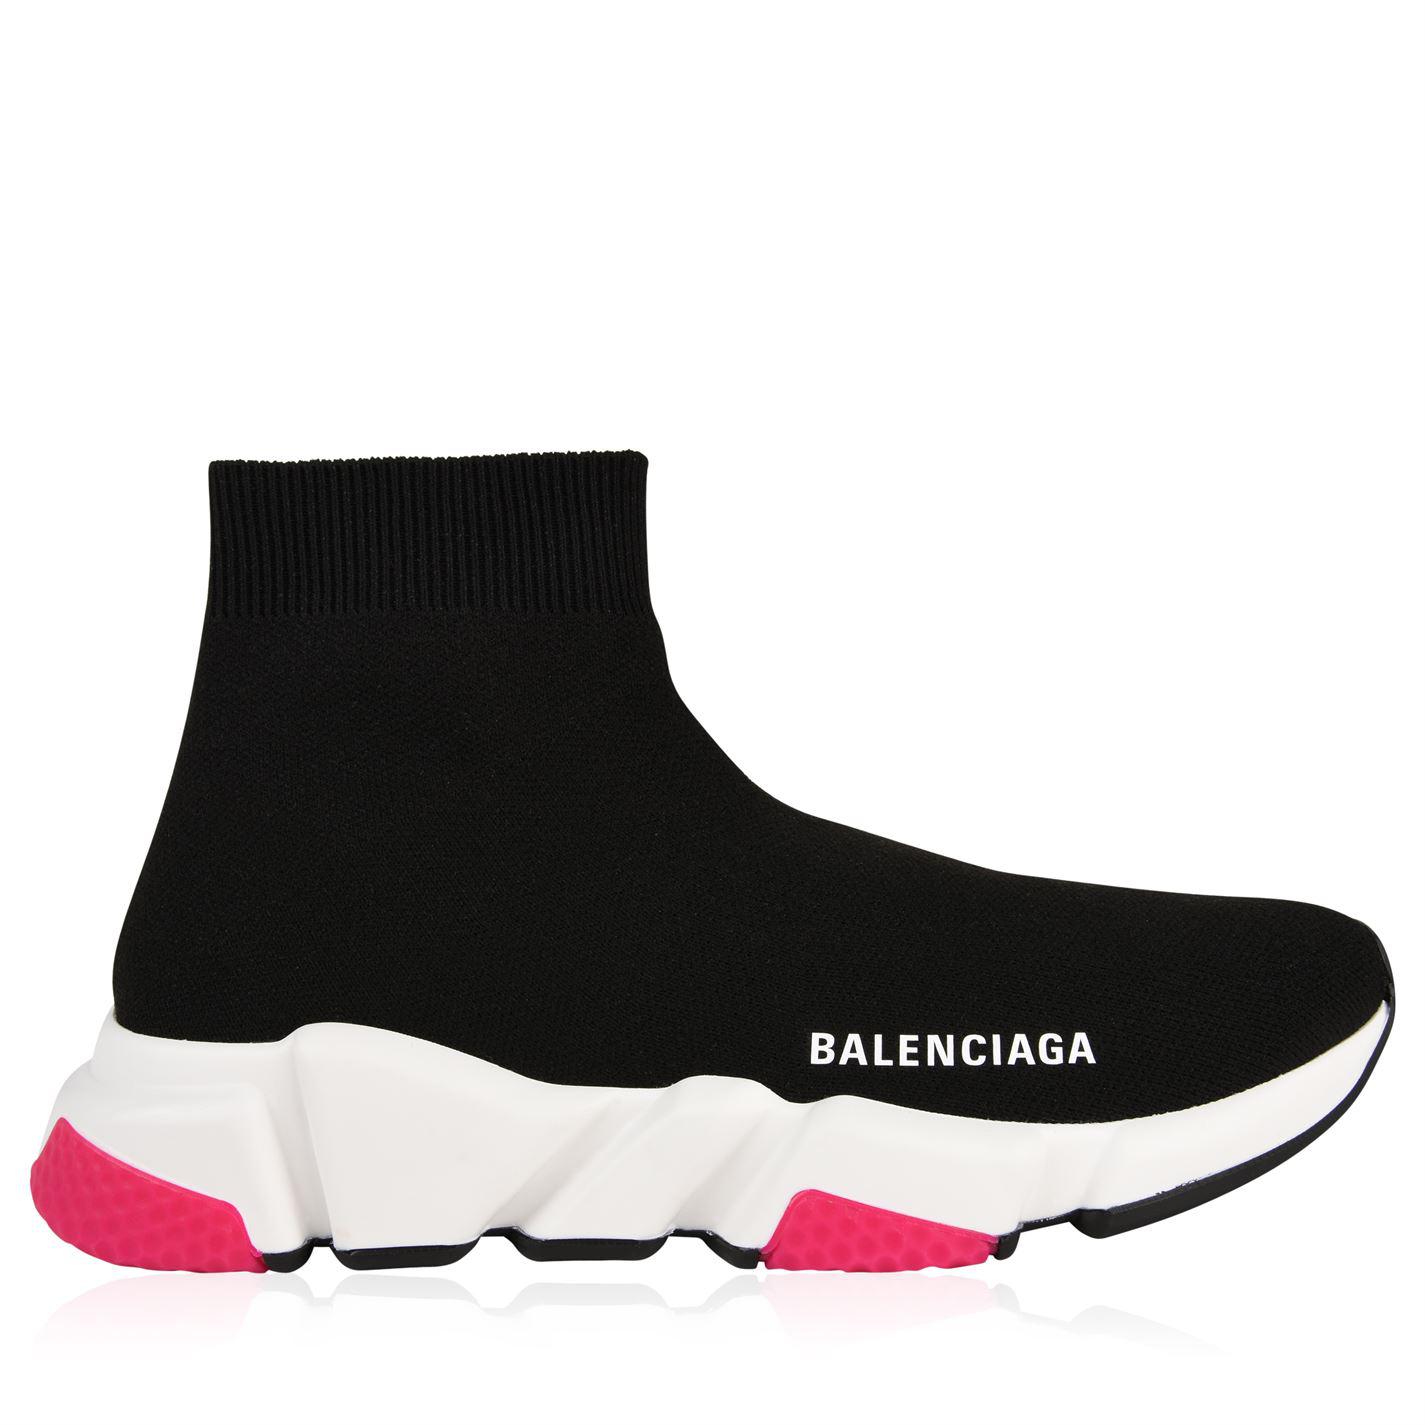 Lyst - Balenciaga Speed Trainers in Black - Save 24.8051948051948%